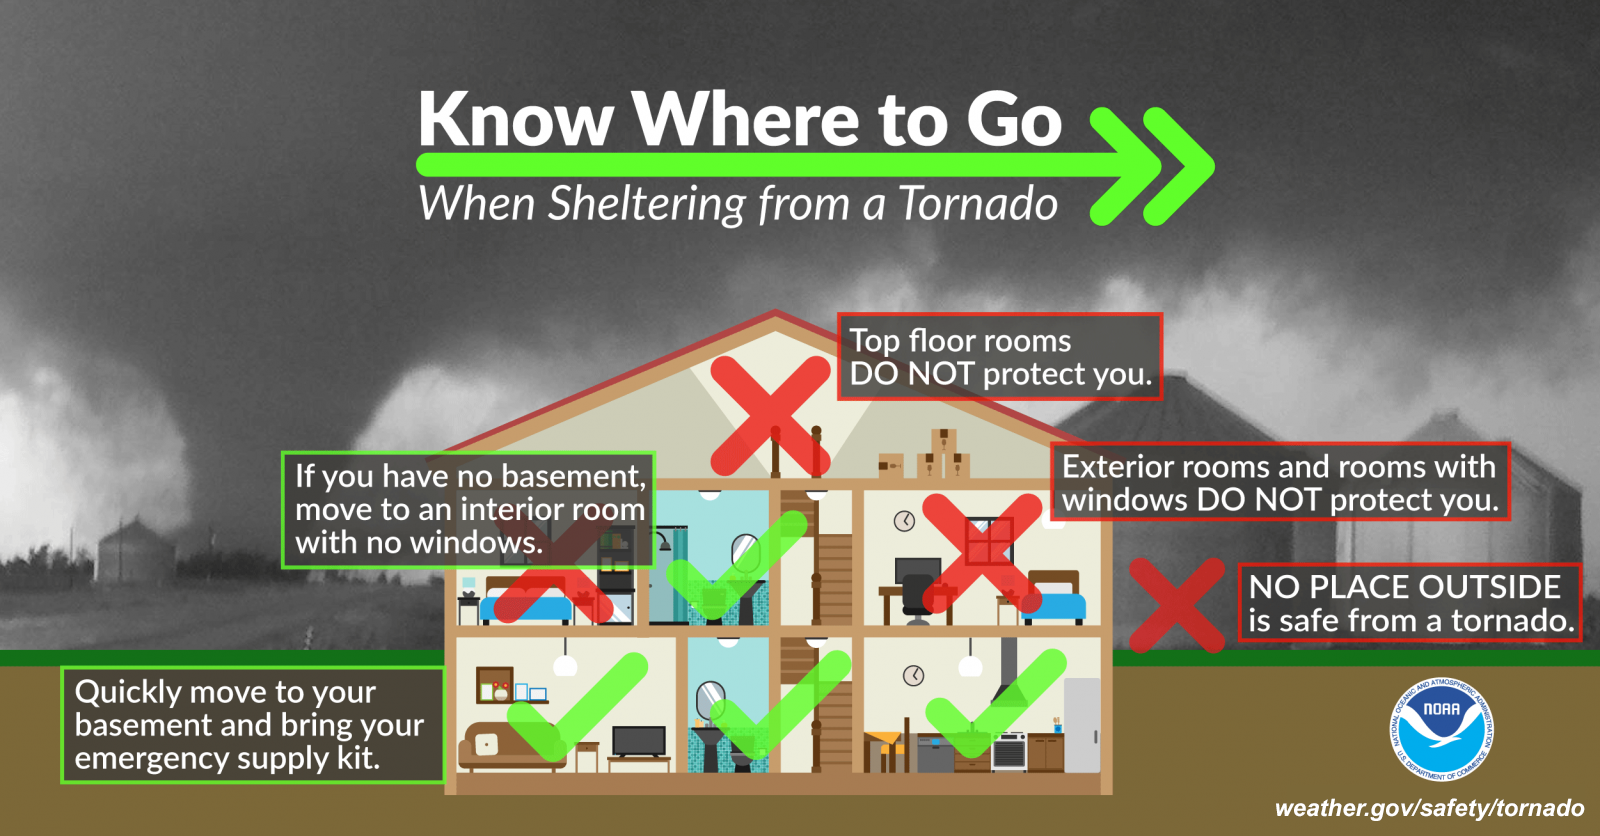 Know Where to Go When Sheltering from a Tornado:Quickly move to your basement and bring your emergency supply kit. If you have no basement, move to an interior room with no windows. Top floor rooms do not protect you. Exterior rooms and rooms with windows do not protect you. No place outside is safe from a tornado.